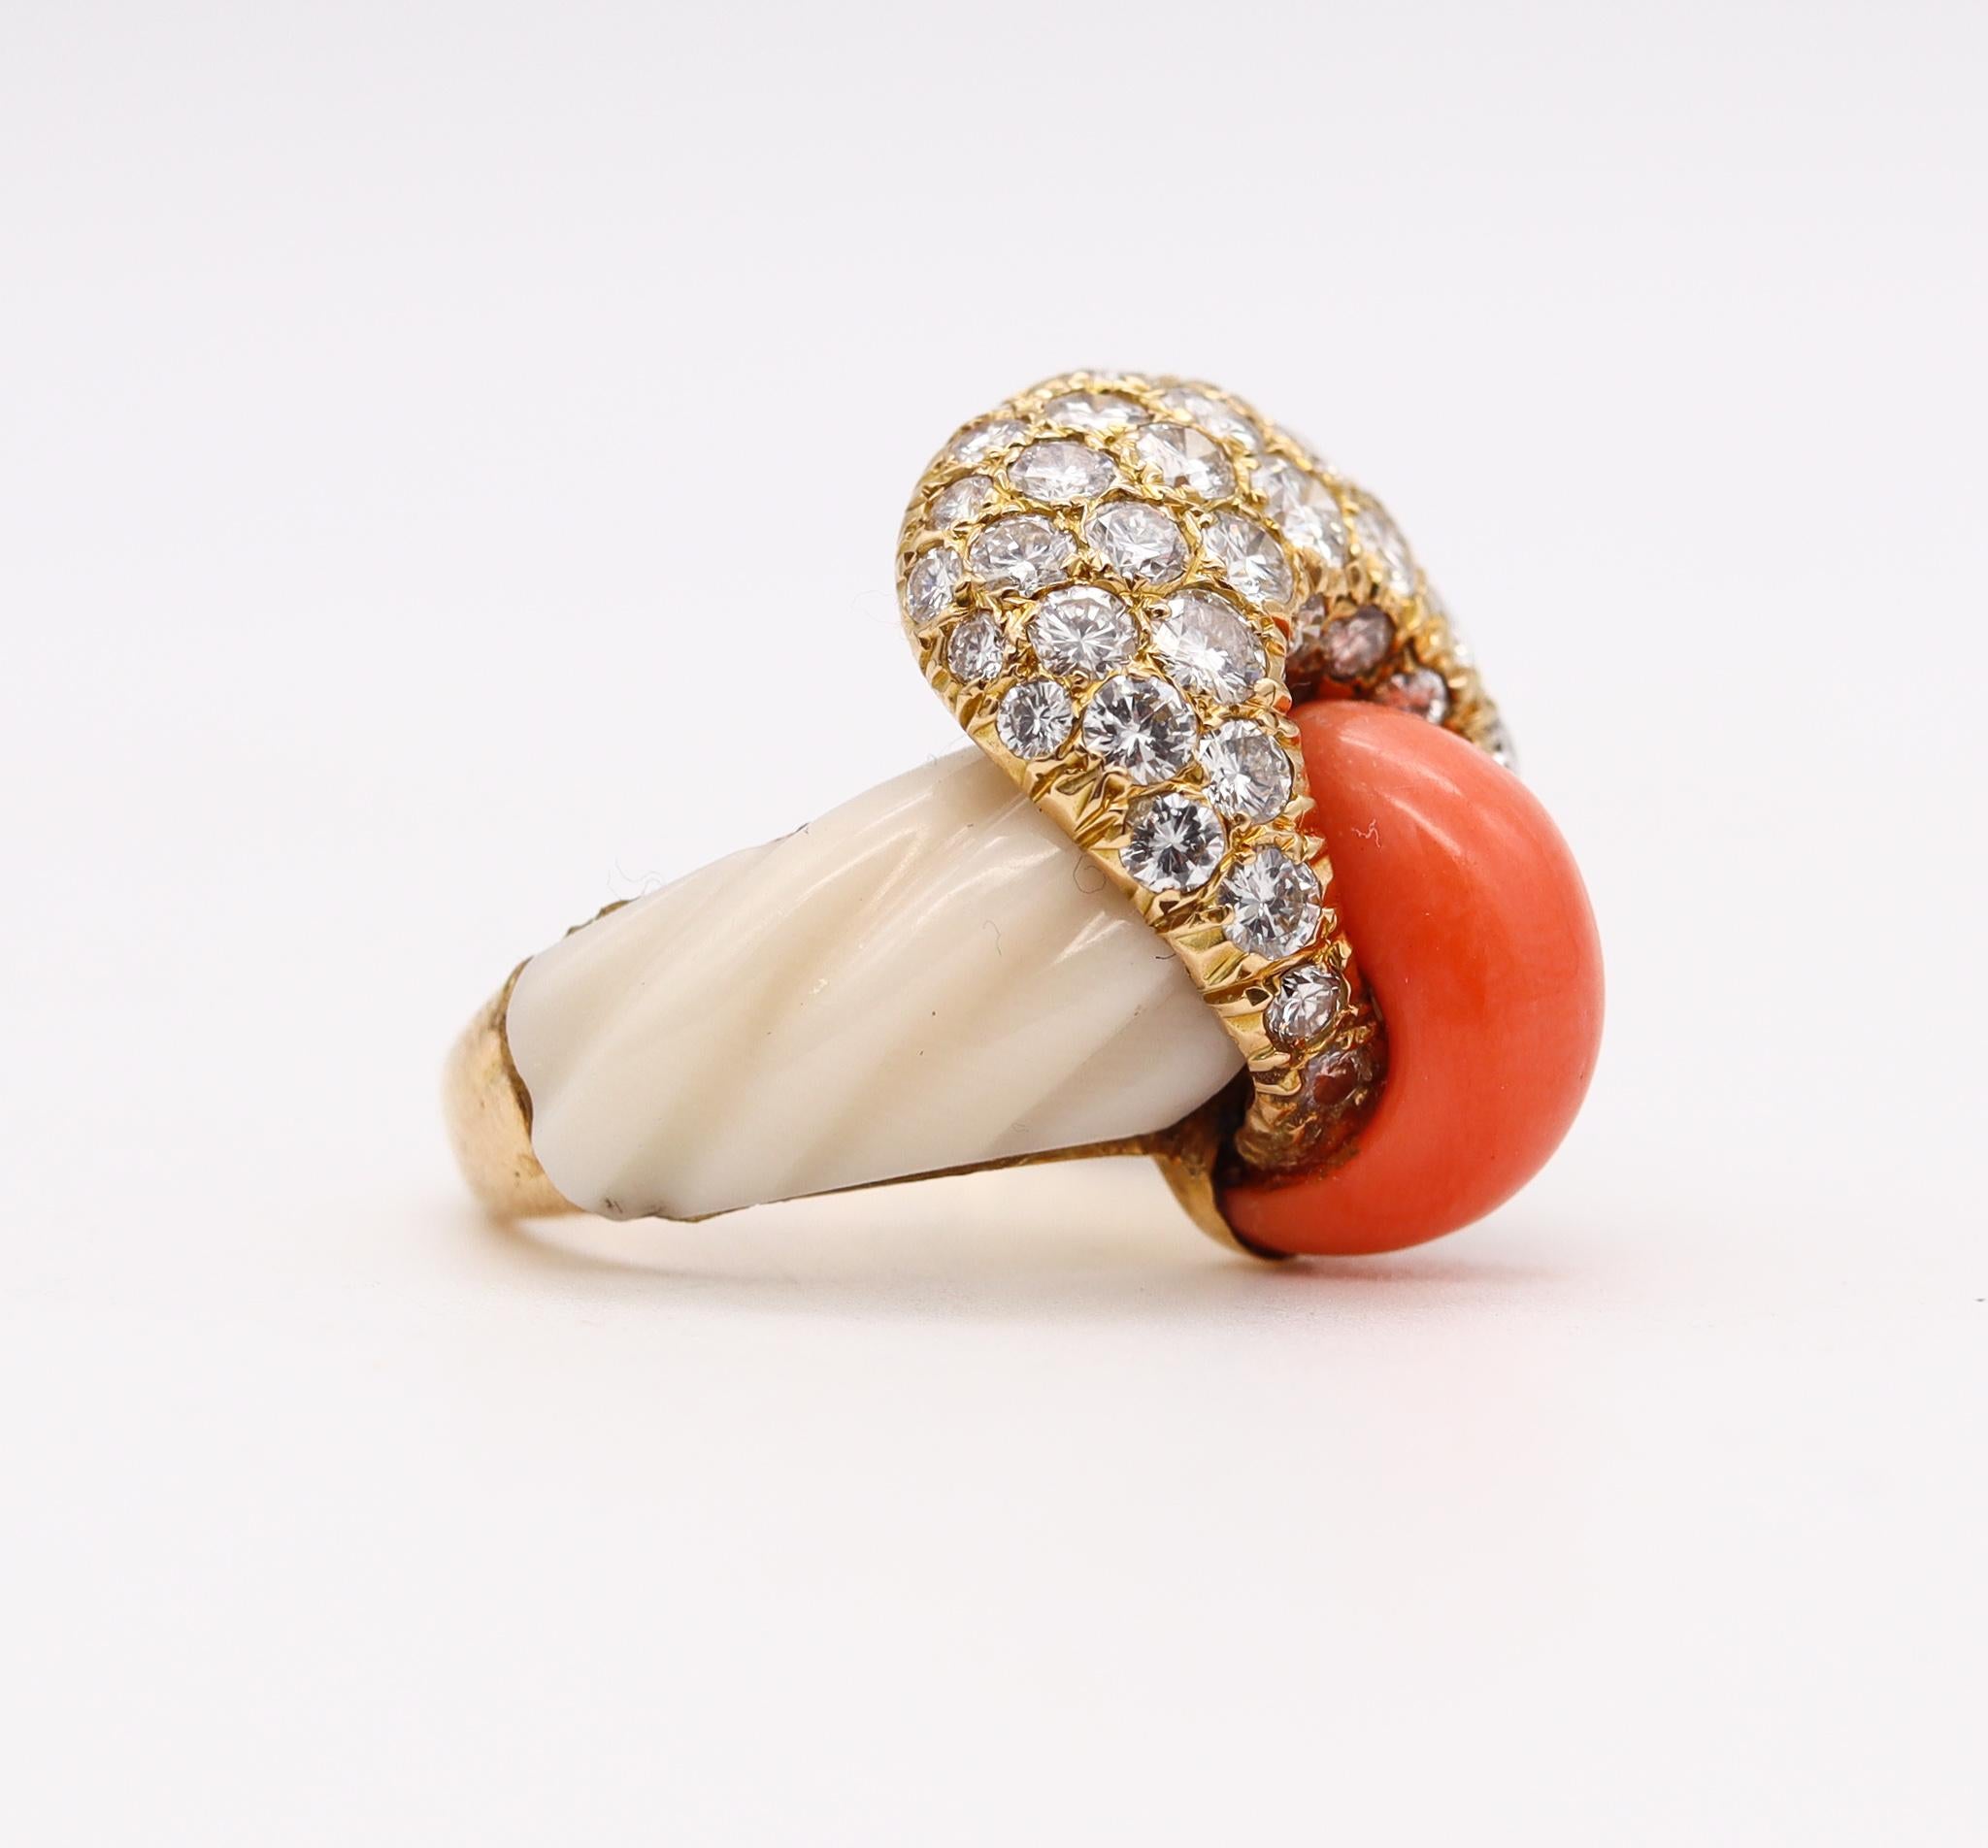 Mixed Cut French 1970 Paris Cocktail Ring in 18kt Yellow Gold 2.52 Cts VVS Diamonds Coral